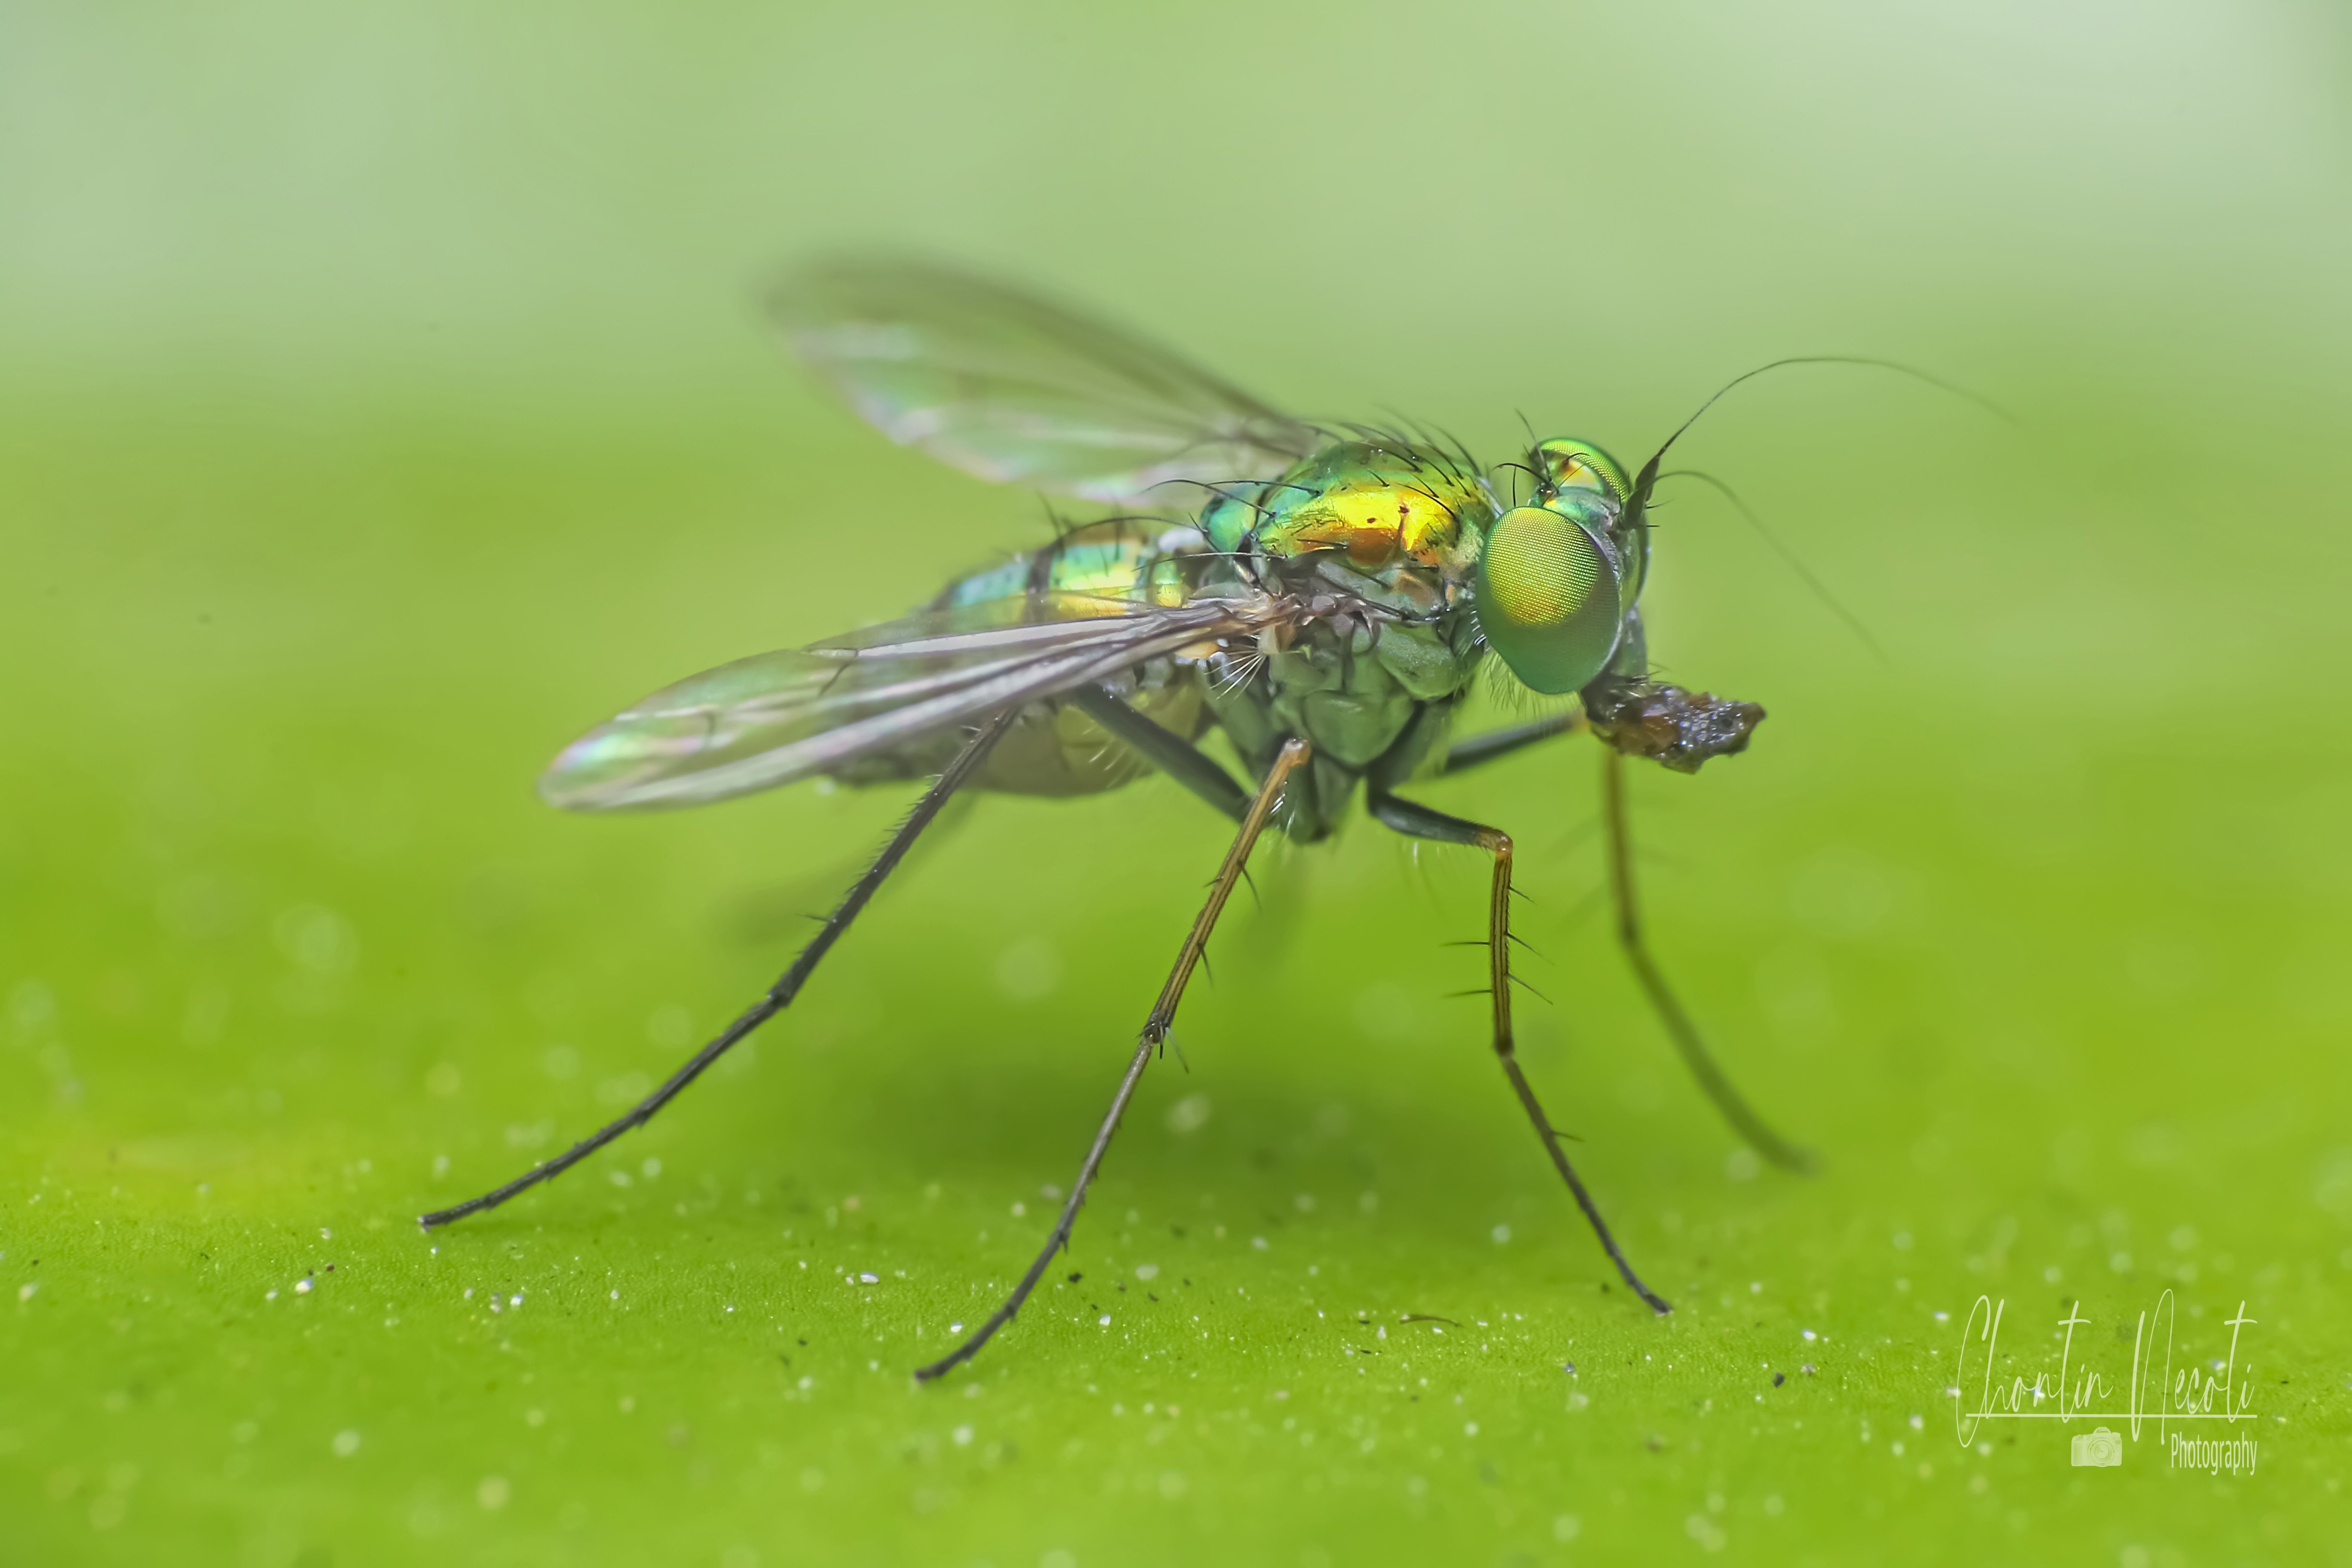 Fly, insect, macro, small, green, outdoor, nature, natural, beauty, beautiful, eyes, fast, close up, NeCoTi ChonTin